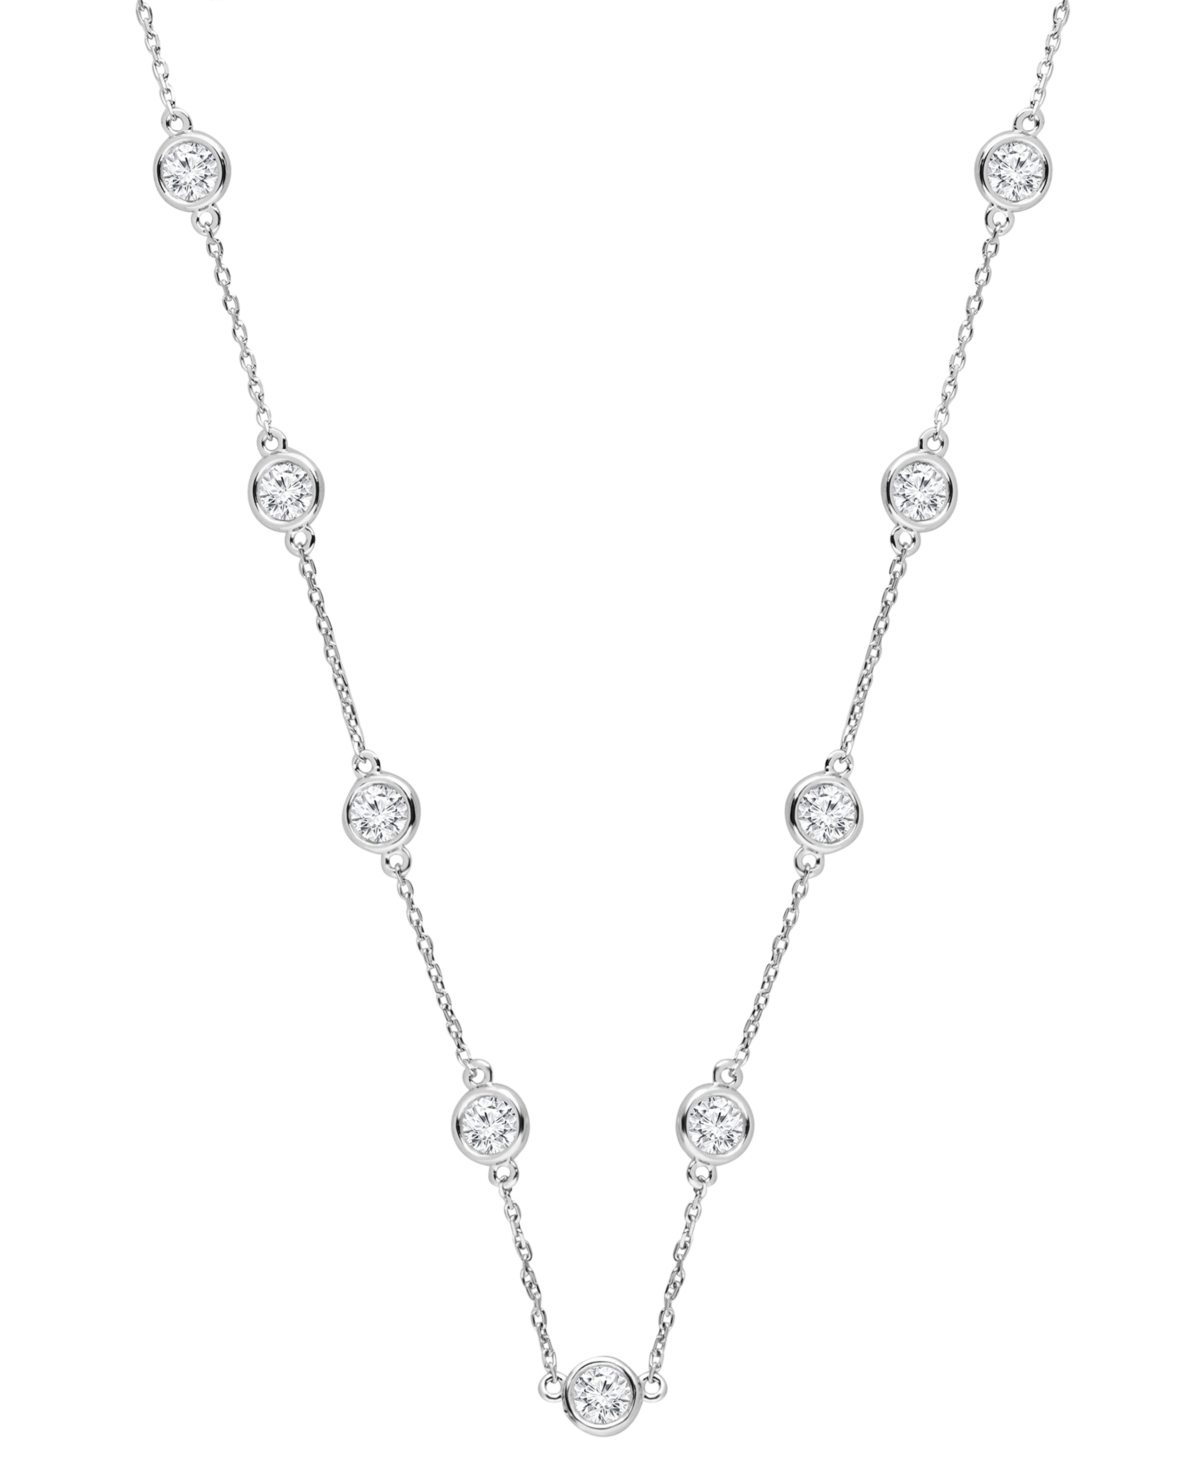 Lab Grown Diamond Statement Necklace (6 ct. t.w.) in 14k White Gold, 18" + 4" extender - White Gold